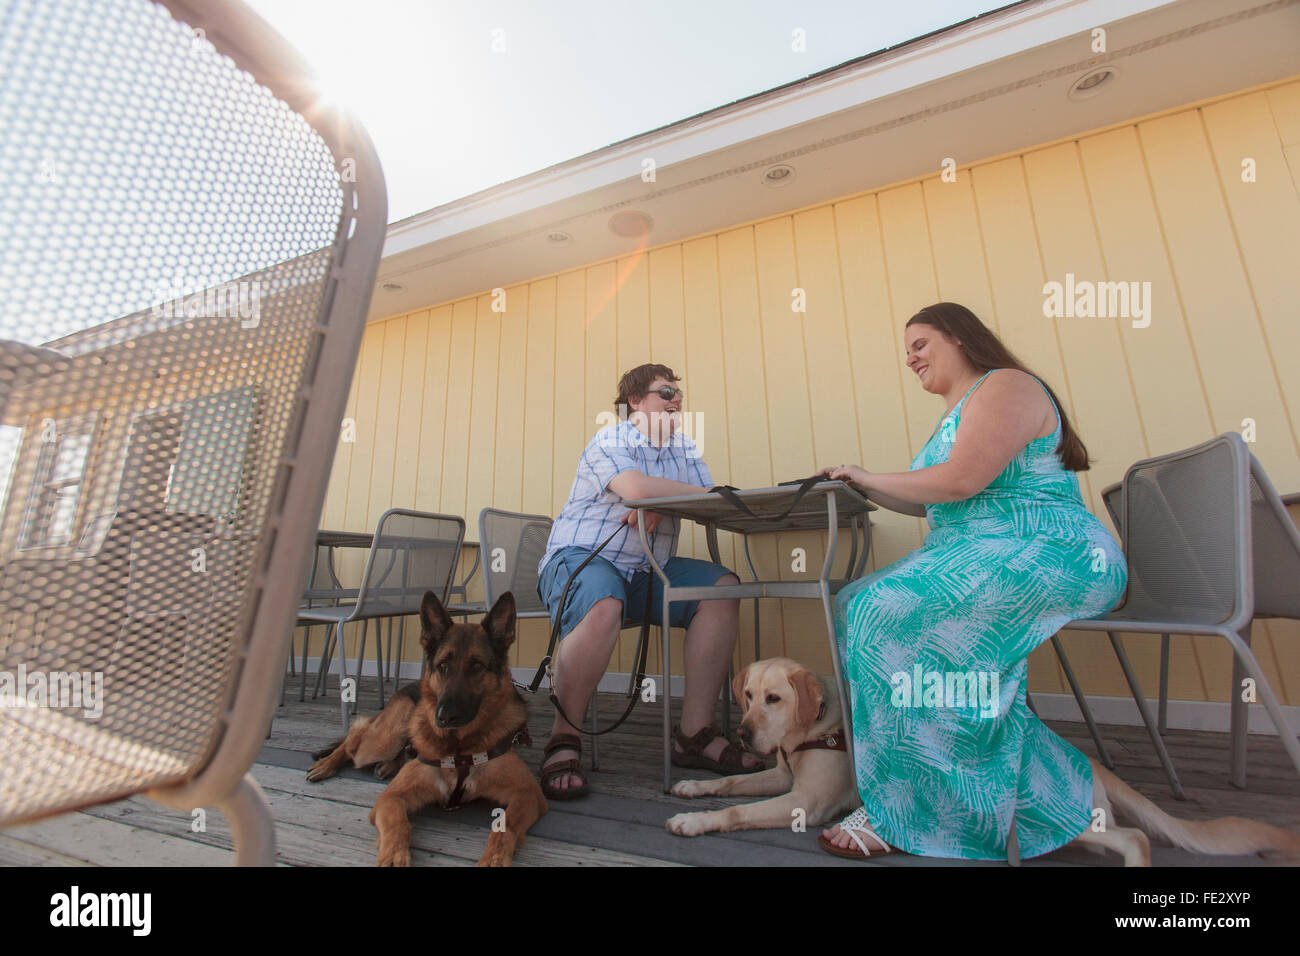 Blind couple and their service dogs sitting at an outdoor cafe Stock Photo